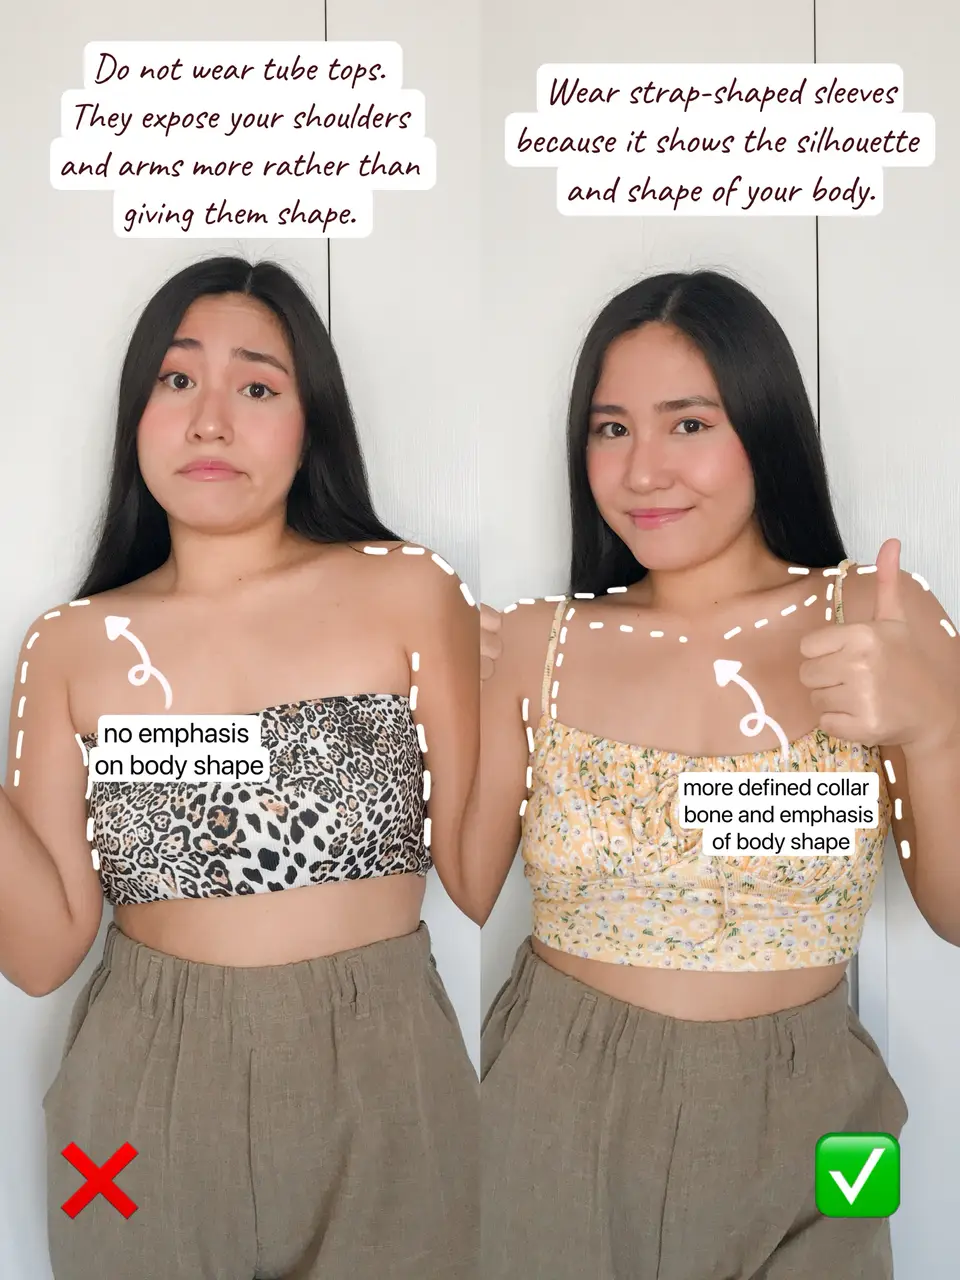 Thick Arms Problems? TIP: Wear Right Clothing